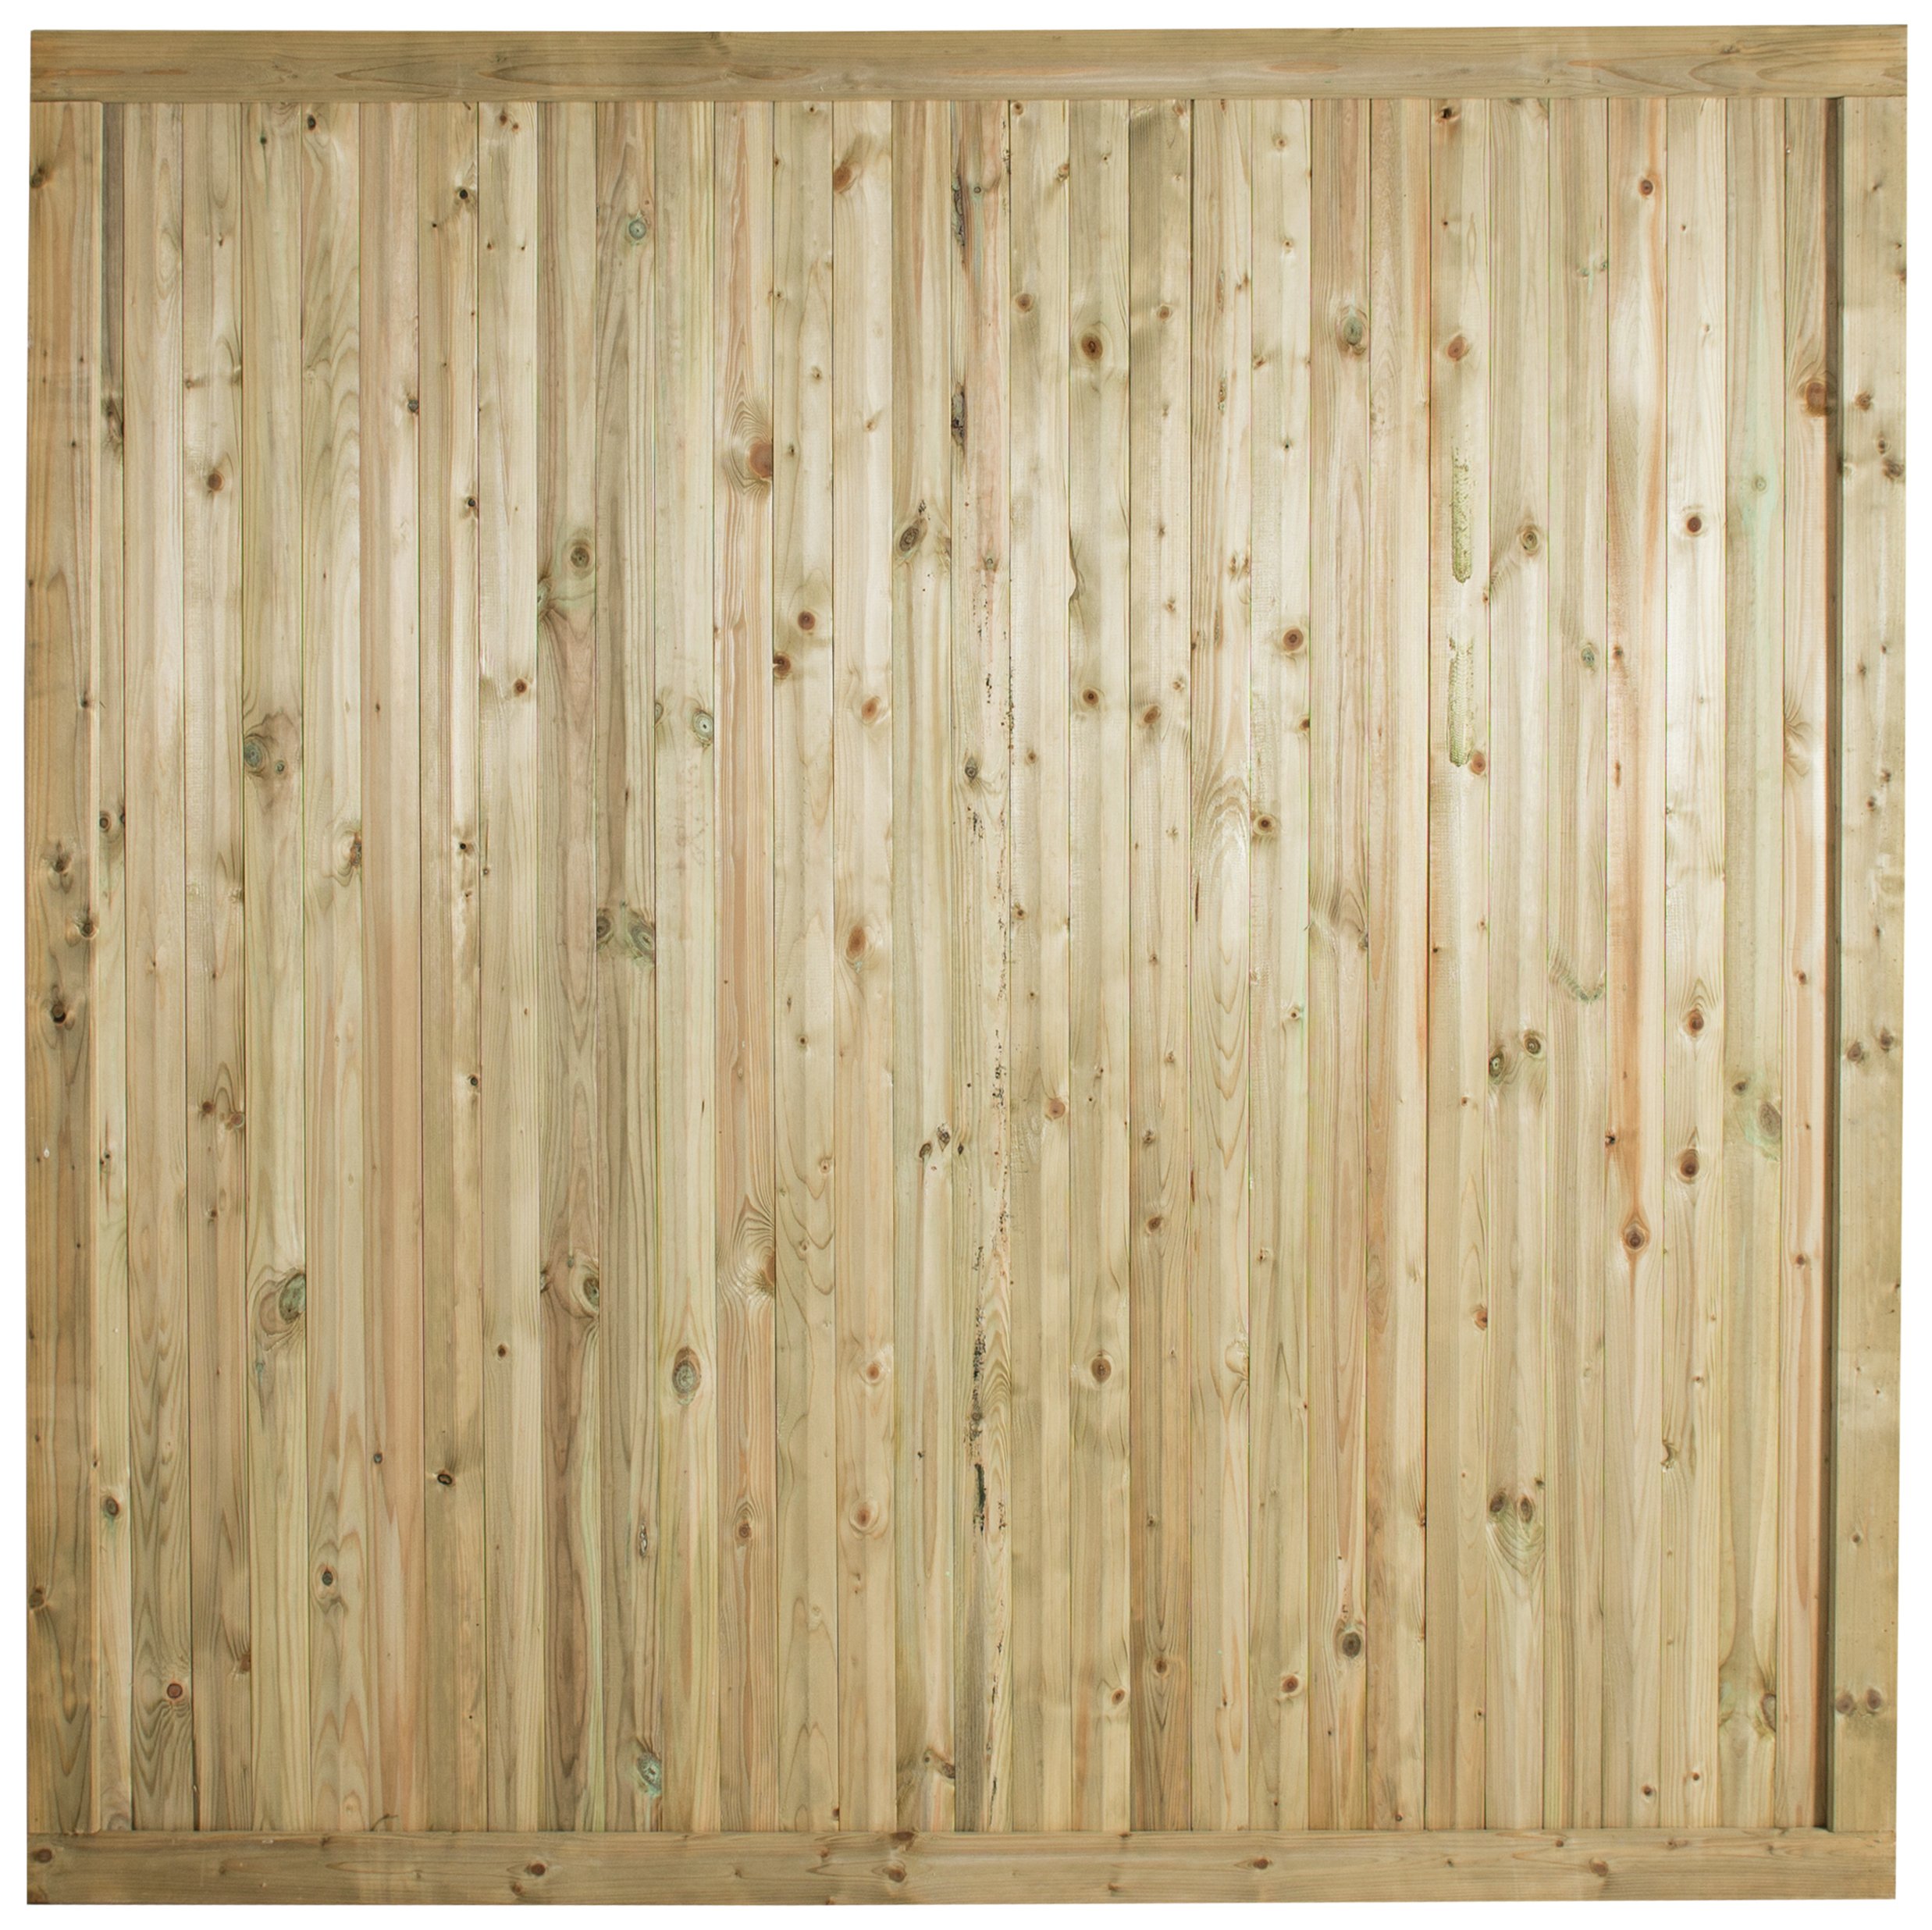 Forest Decibel Noise Reduction 6ft Fence Panel - Pack of 4